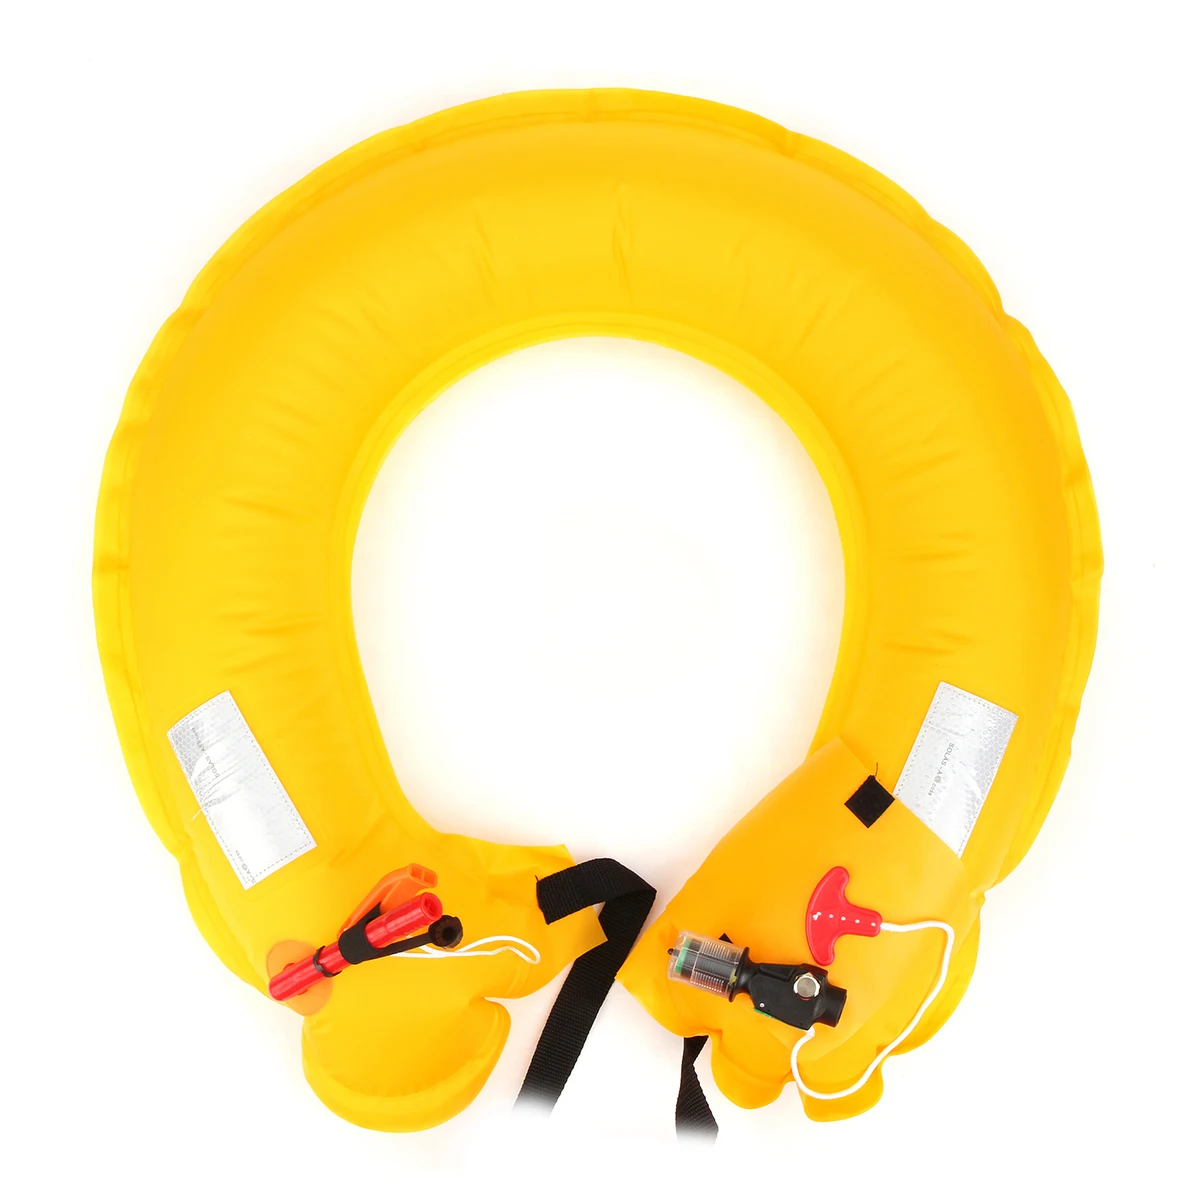 Inflatable Personalized Life Preserver Ring - Buy Life Preserver Ring ...